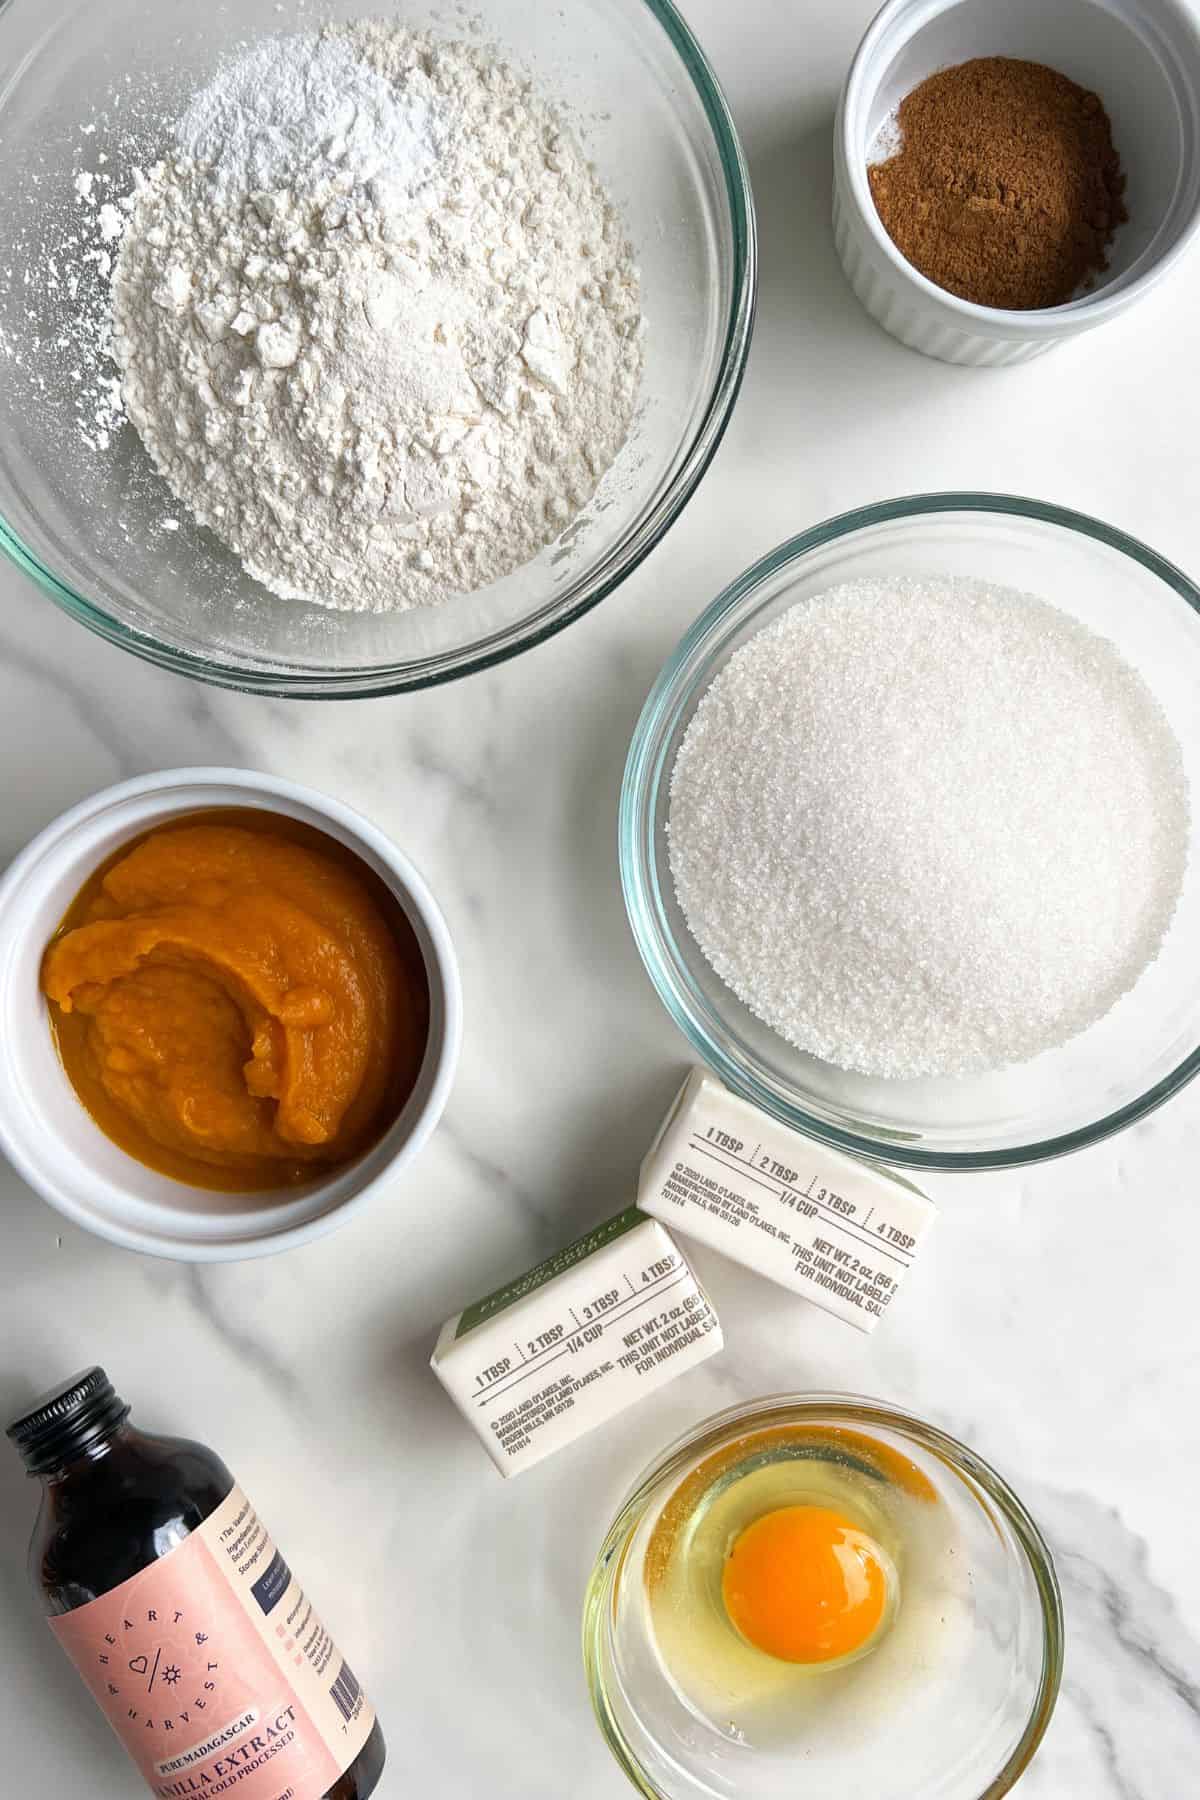 Ingredients measured out in bowls to make Pumpkin Bread with Cream Cheese Frosting